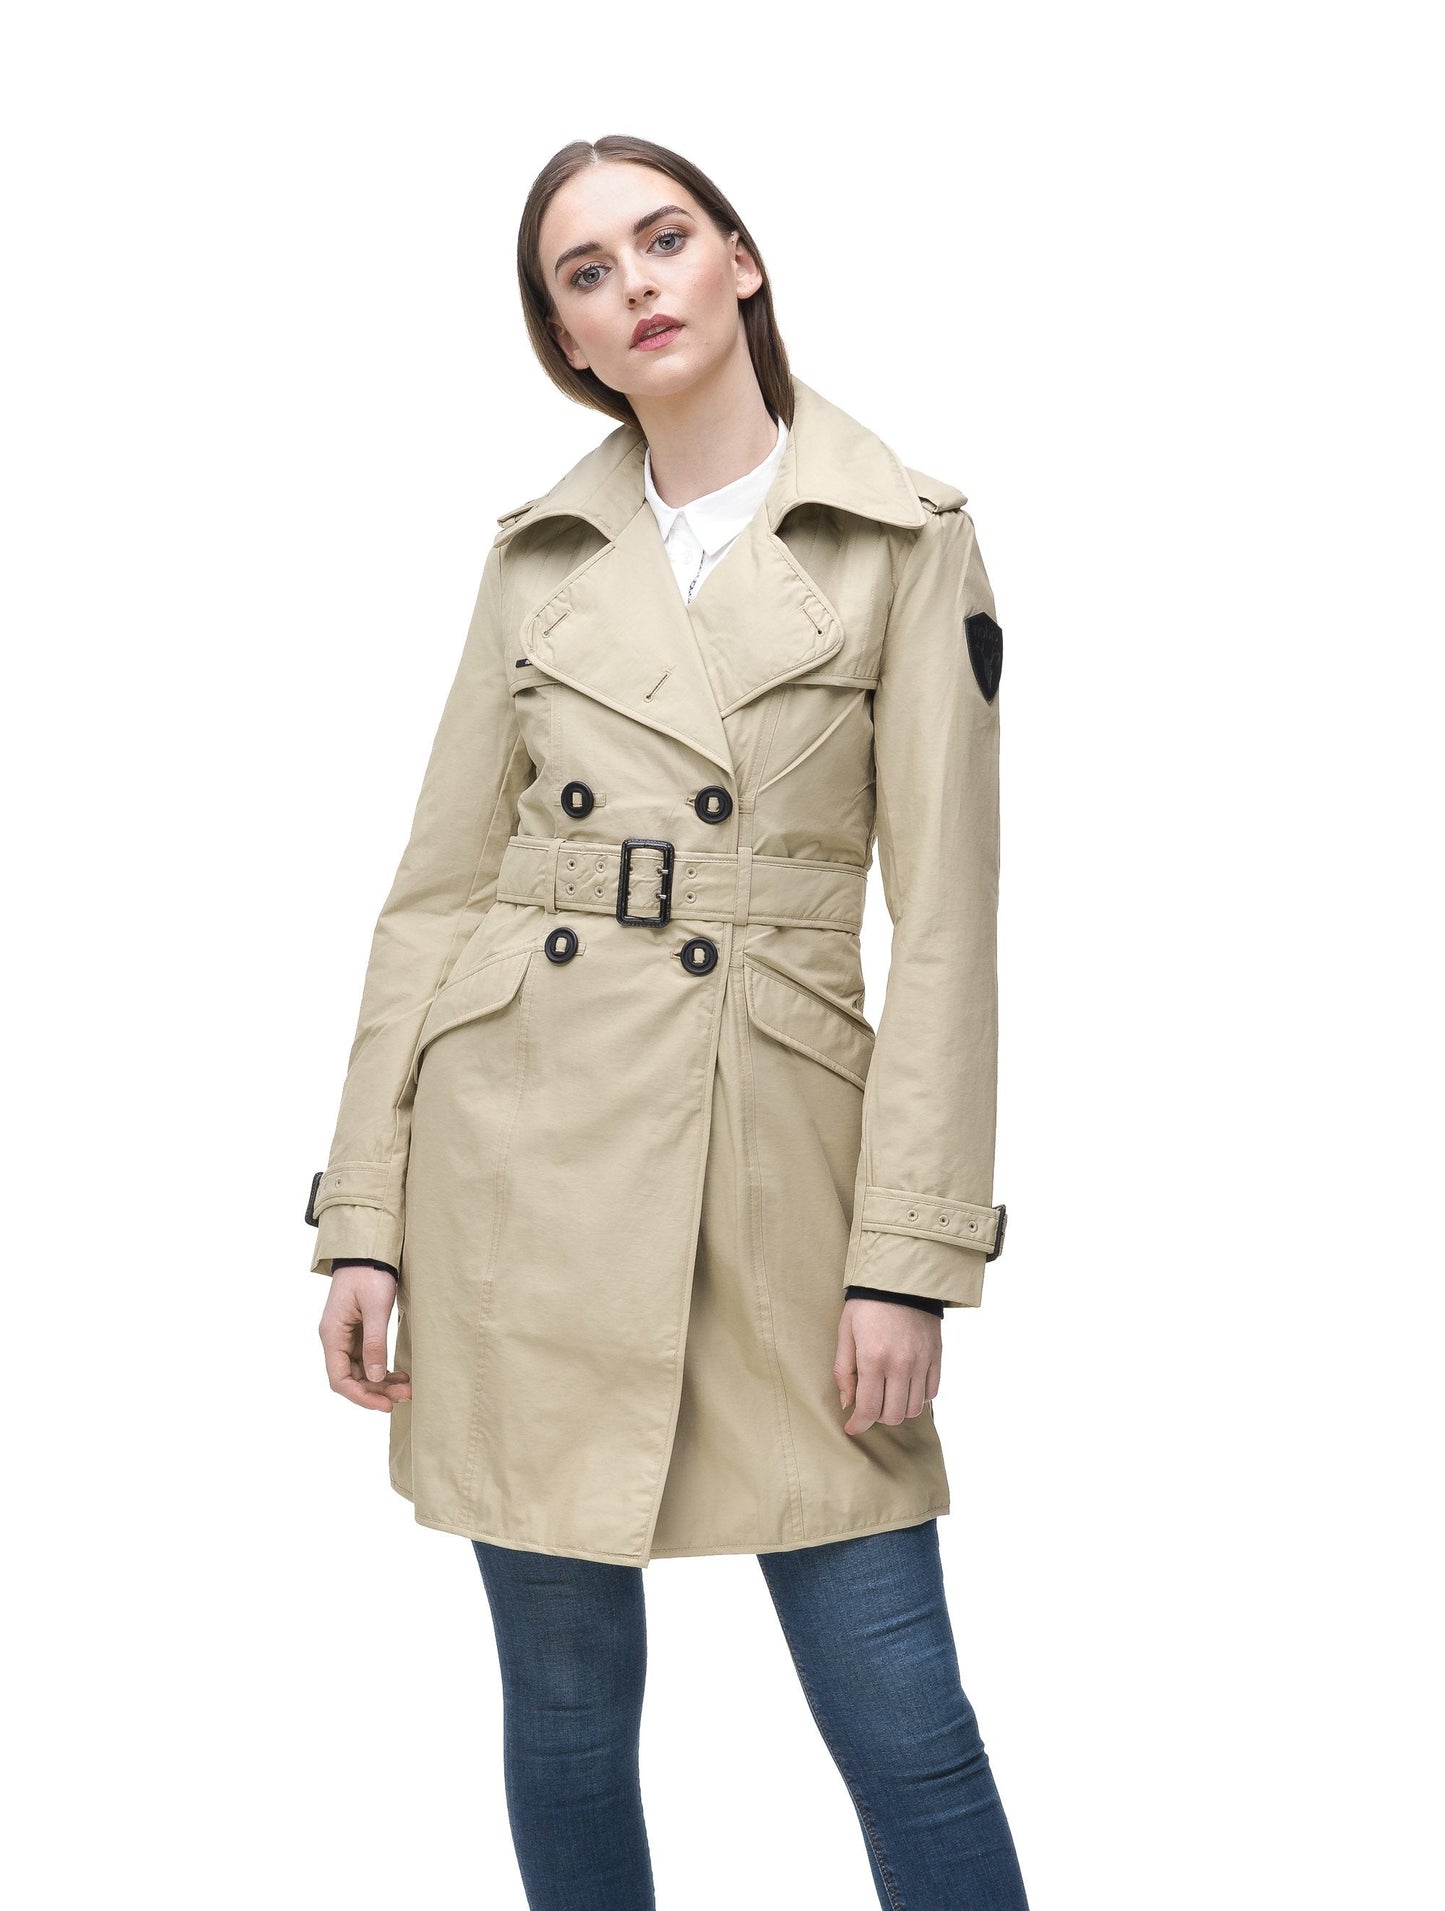 Women's classic trench coat that falls just above the knee in Sand